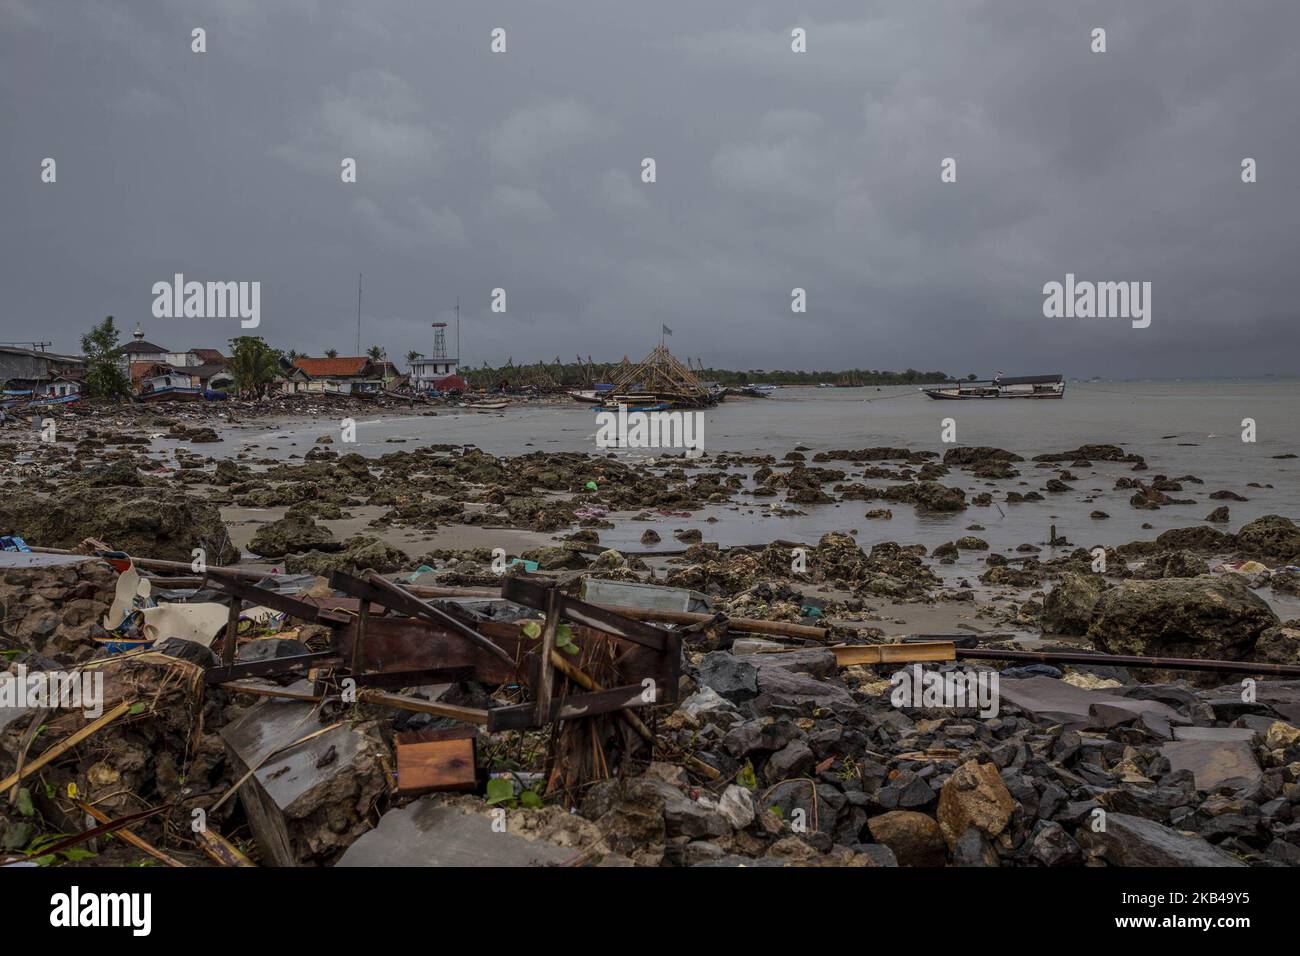 A view of Banten area, Indonesia, on December 24, 2018. Over 280 people have reportedly been killed after a volcano-triggered tsunami hit the coast around Indonesia's Sunda Strait on Saturday night, injuring at least 1,016 people. (Photo by Donal Husni/NurPhoto) Stock Photo